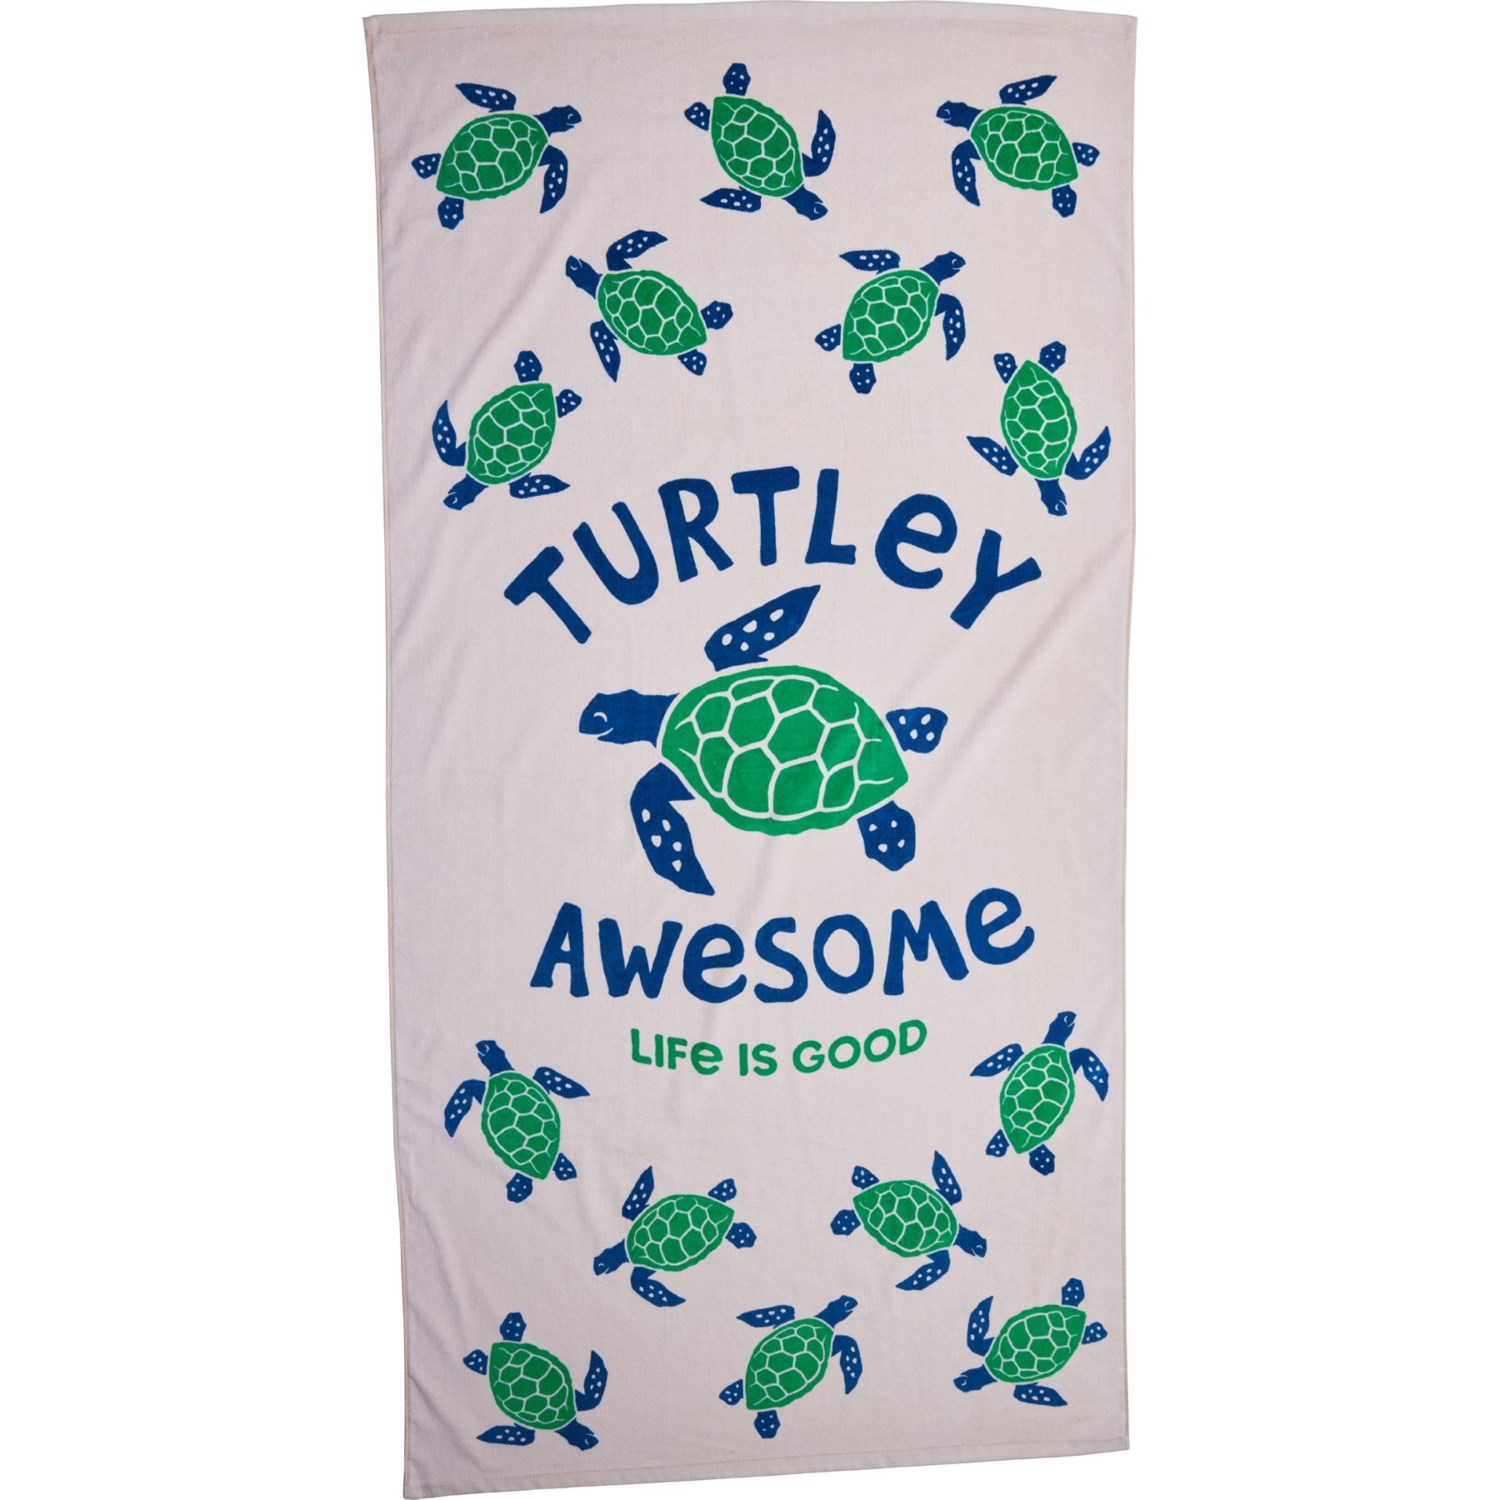 () CtCYObh I[T I[o[TCY r[` ^I - 36x70h Life is Good Life is Good Turtley Awesome Oversized Beach Towel - 36x70h Putty